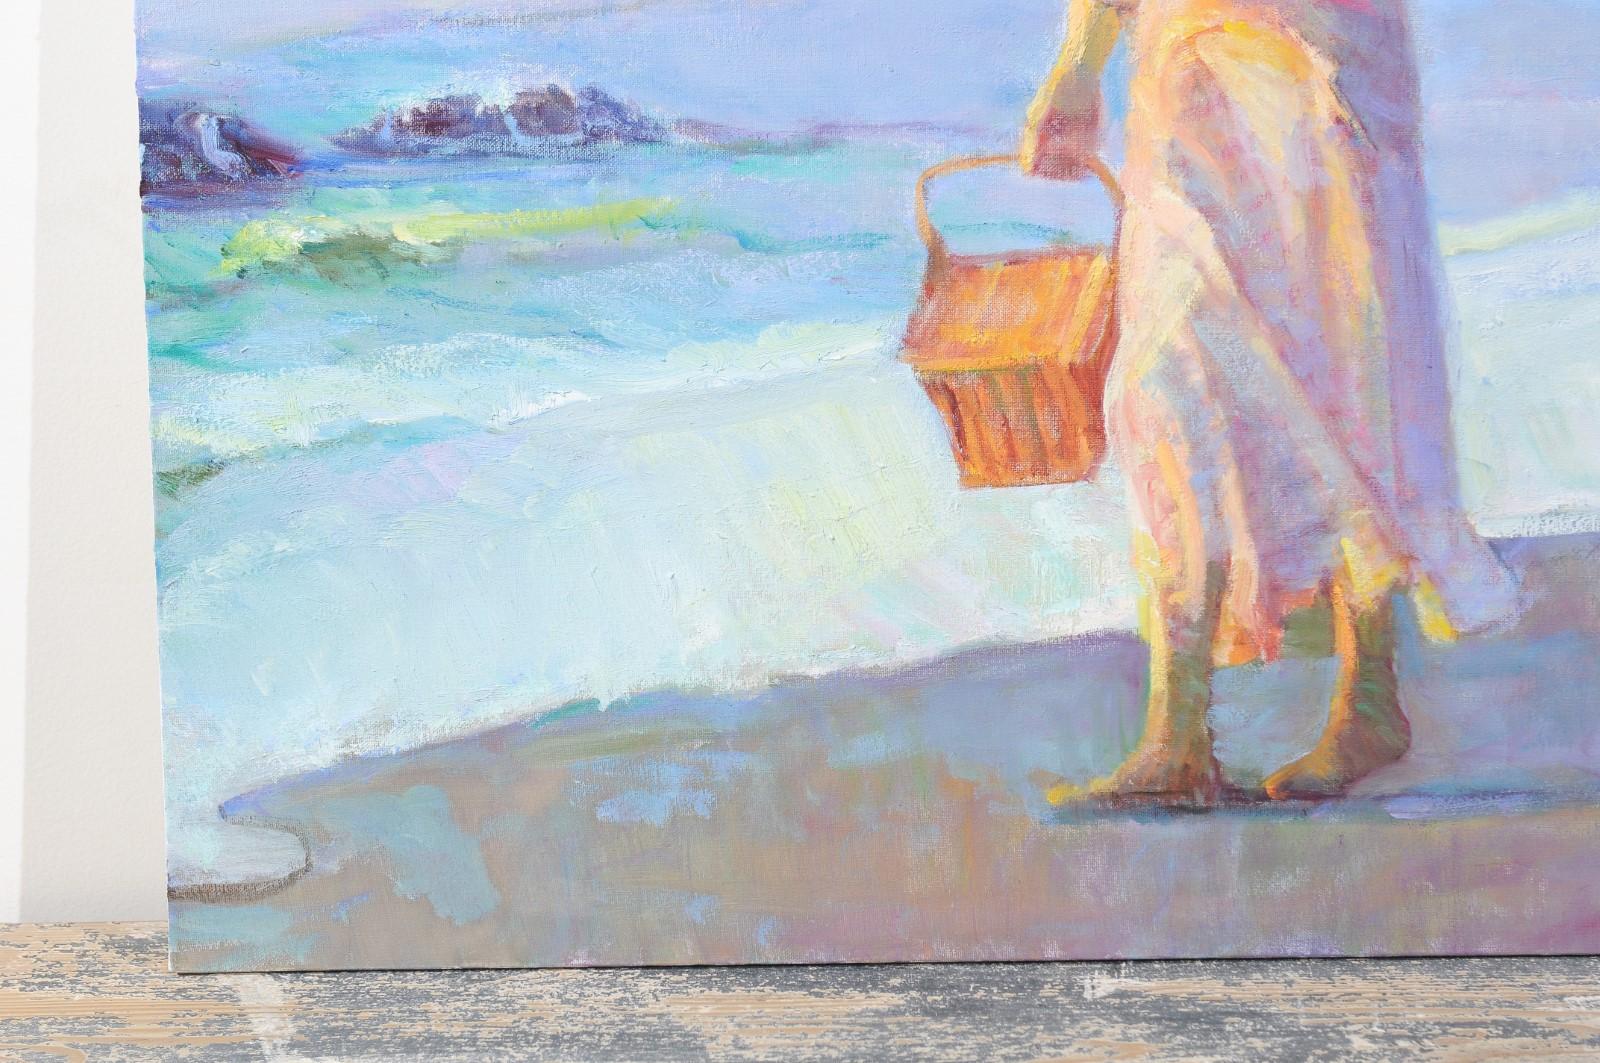 Mother's Joy by Don Hatfield, Original Contemporary American Beach Painting 3